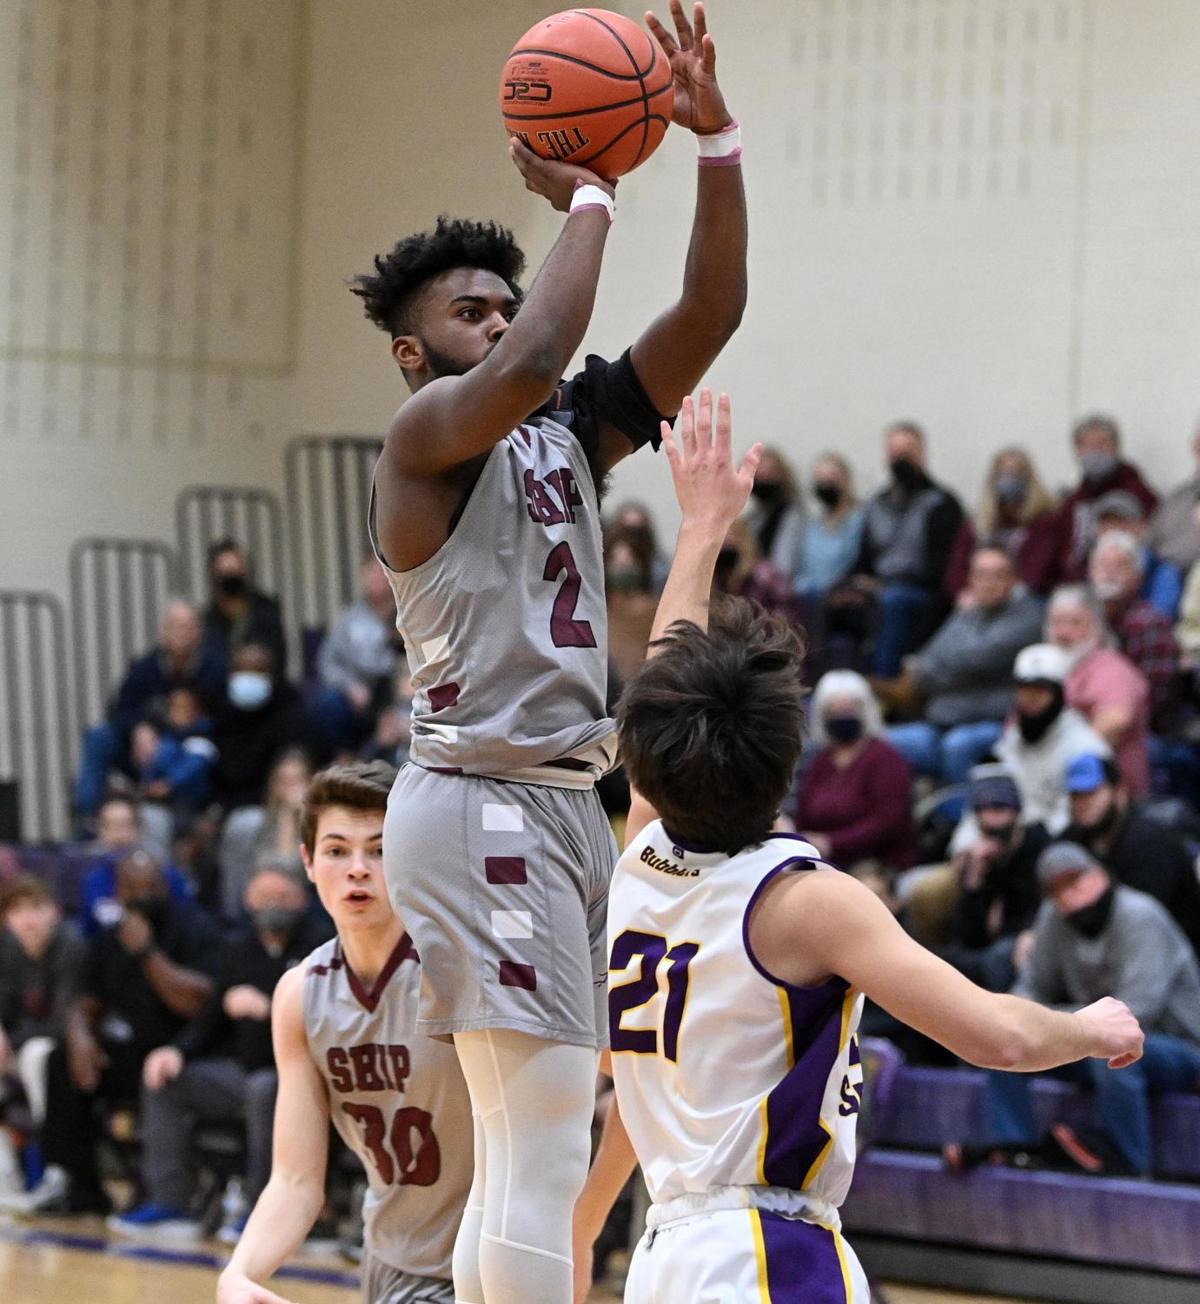 Boys Basketball: Trinity wins on buzzer beater, Cumberland Valley,  Shippensburg, Cedar Cliff extend winning streaks and other notes from  Tuesday's games